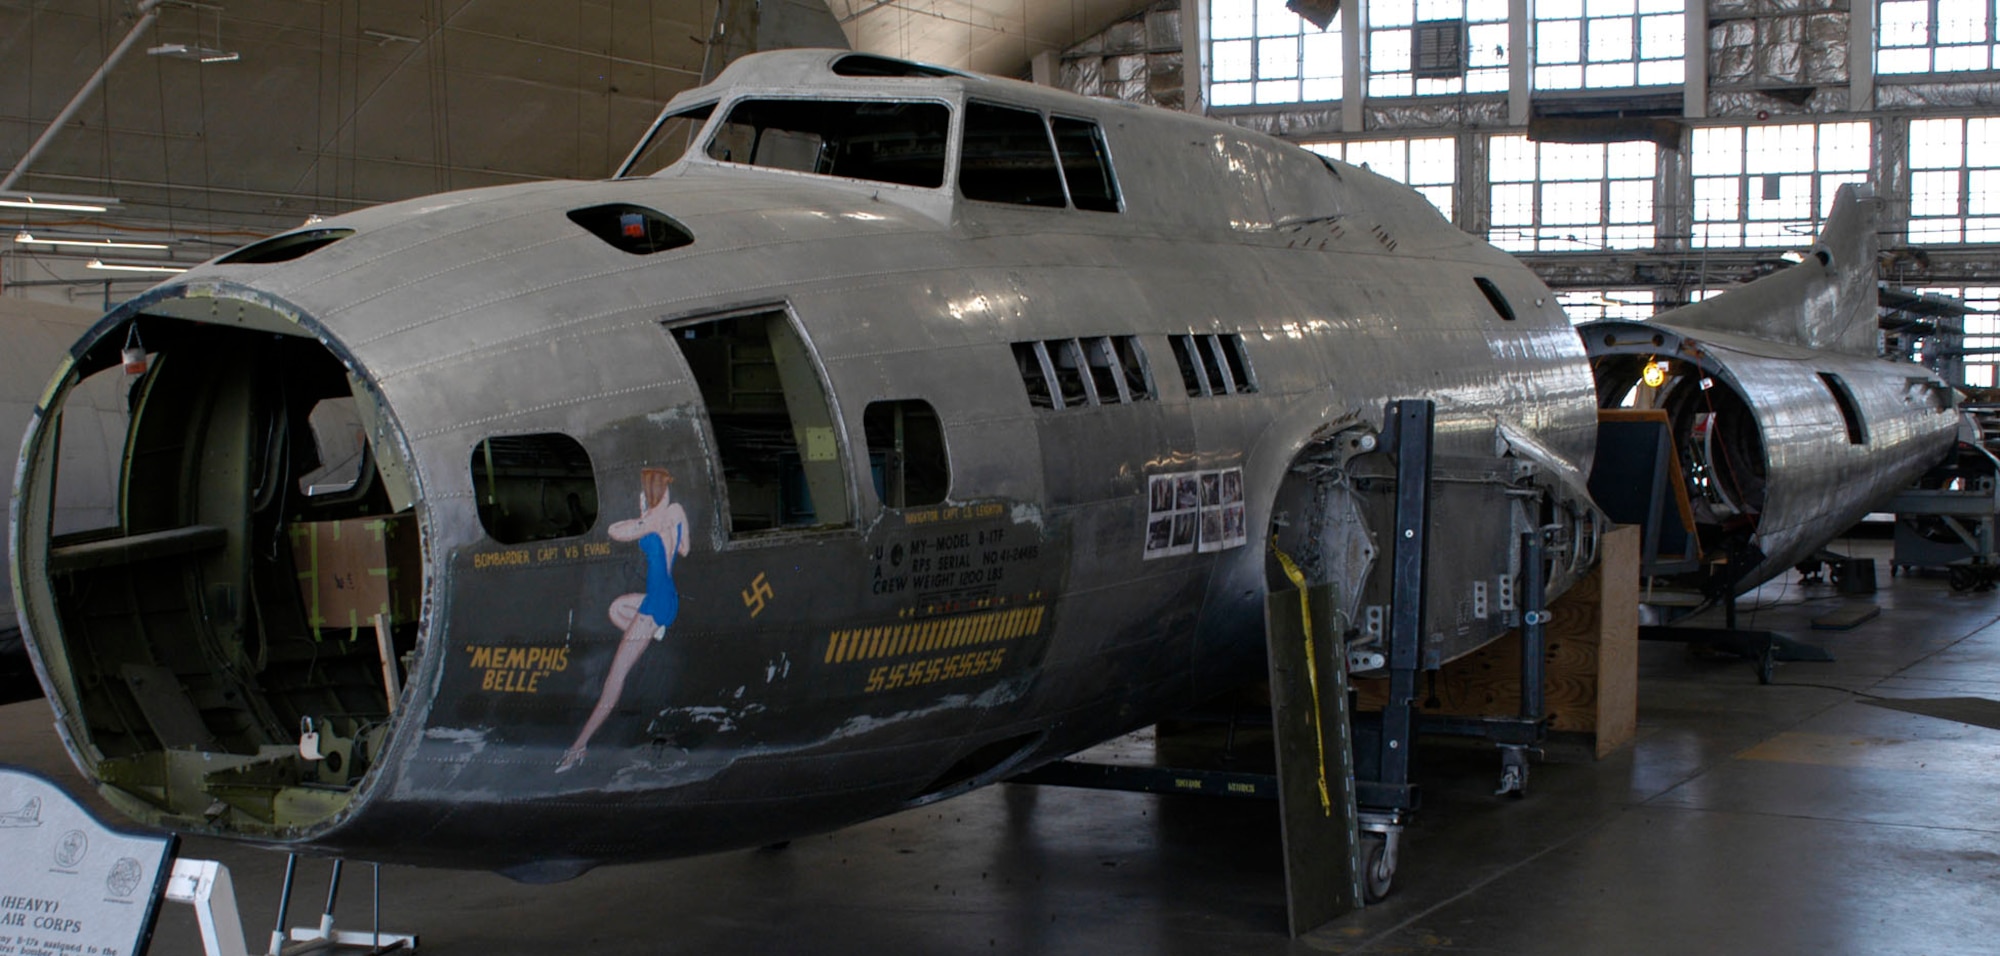 DAYTON, Ohio - B-17F "Memphis Belle" in the Restoration Hangar at the National Museum of the U.S. Air Force.  (U.S. Air Force Photo)